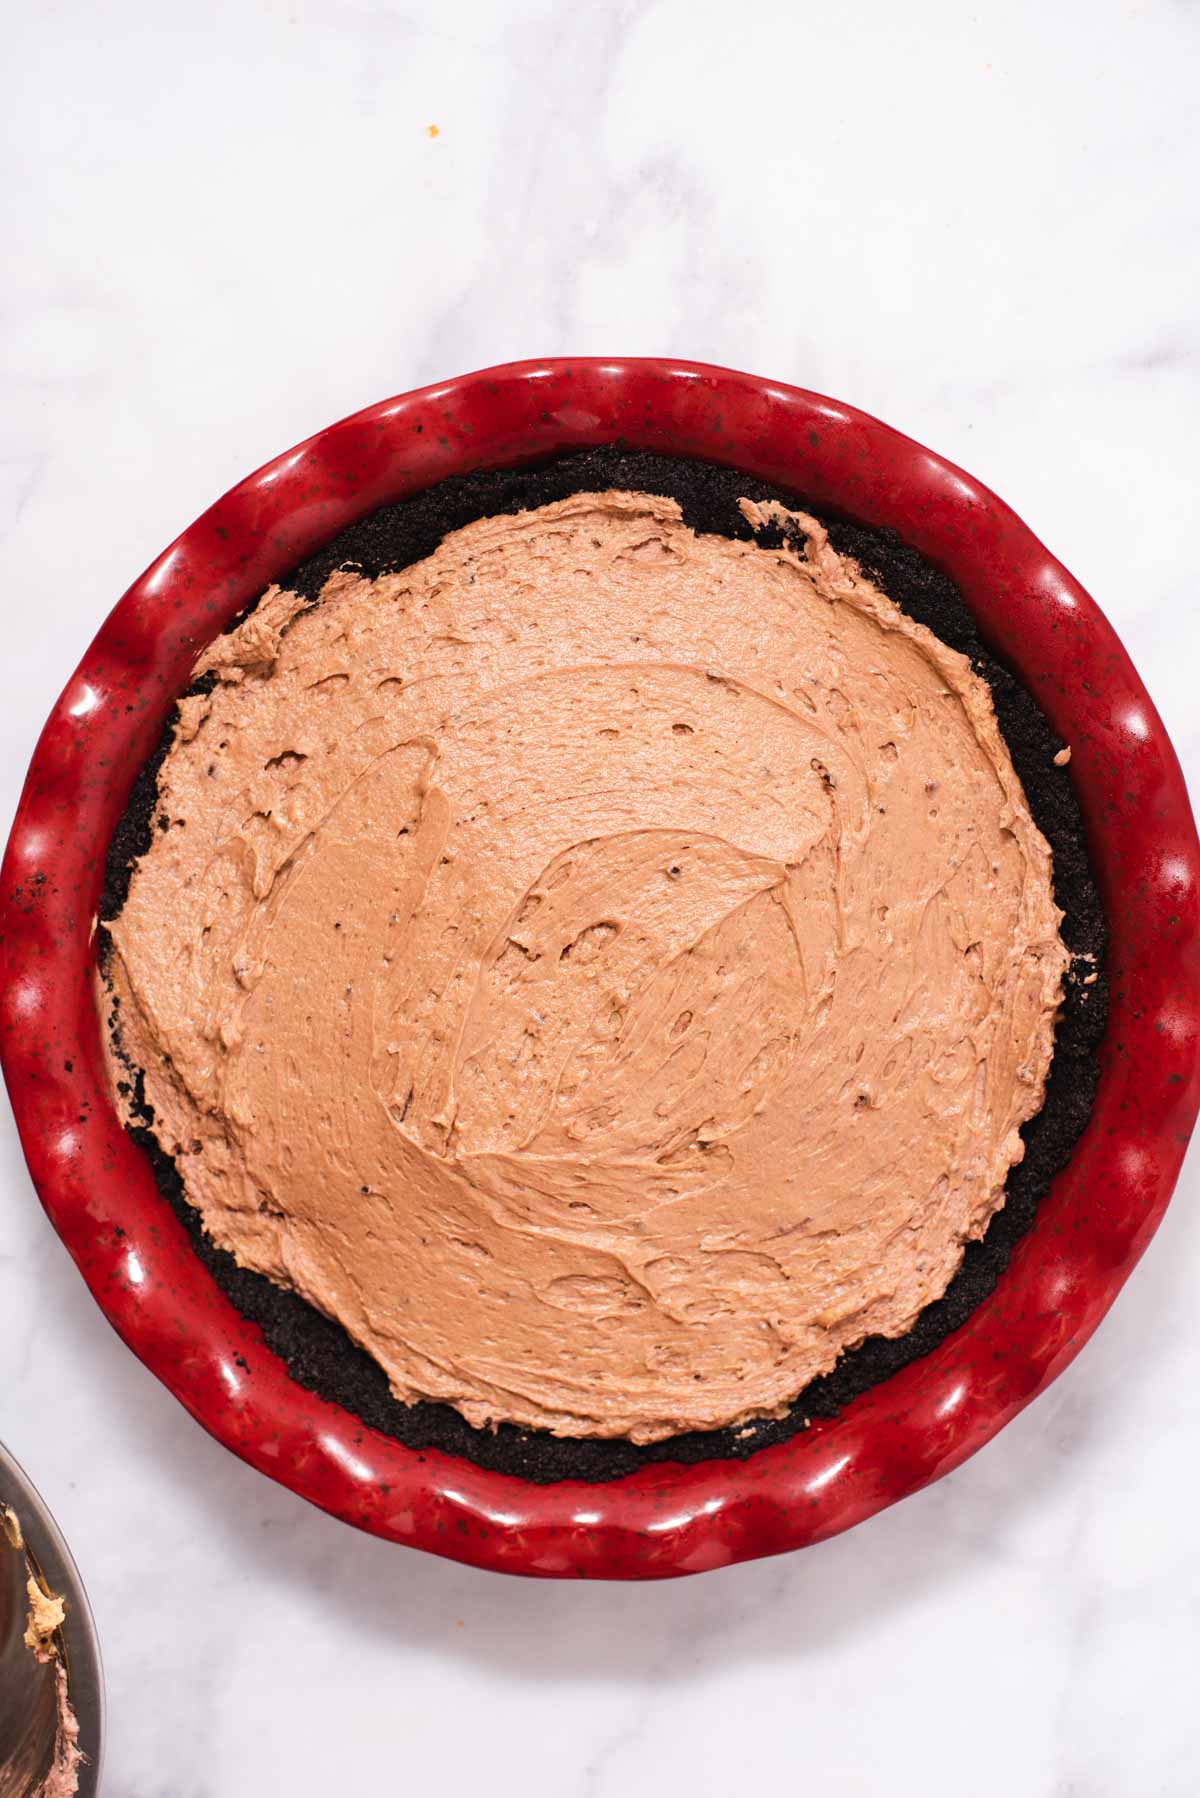 Overhead view of red pie dish filled with chocolate filling